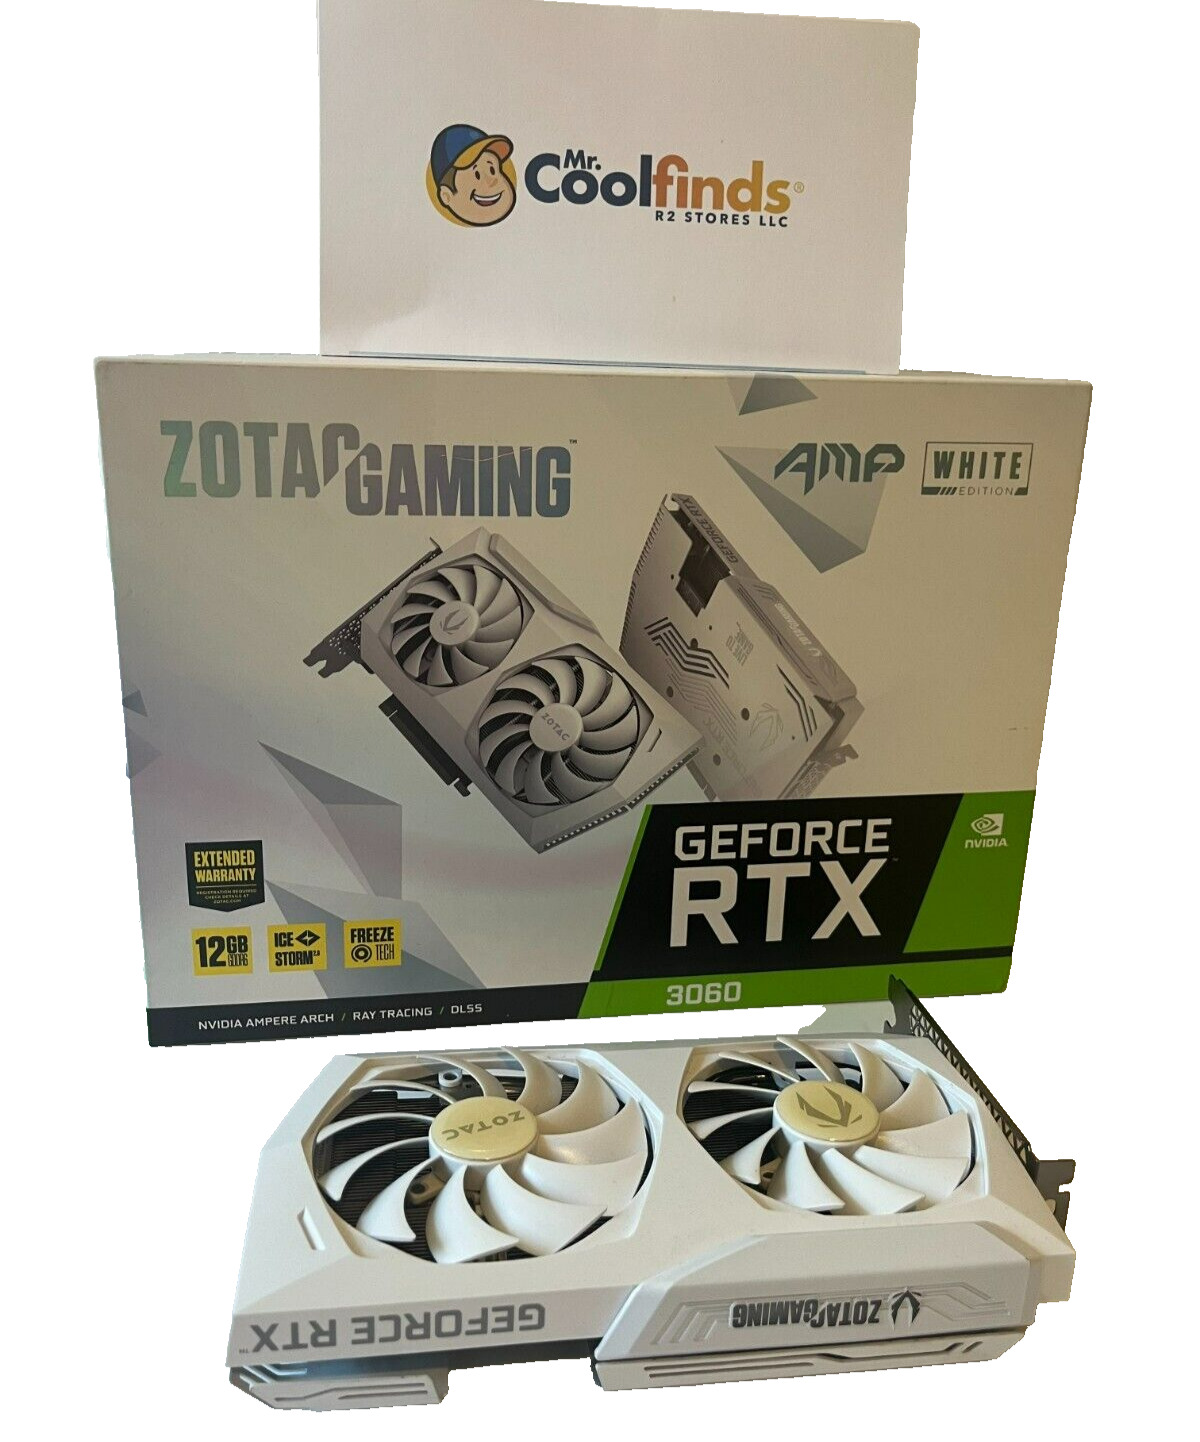 ZOTAC GAMING GeForce RTX 3060 AMP White Edition 12GB GDDR6 Graphics Card 🔥🔥